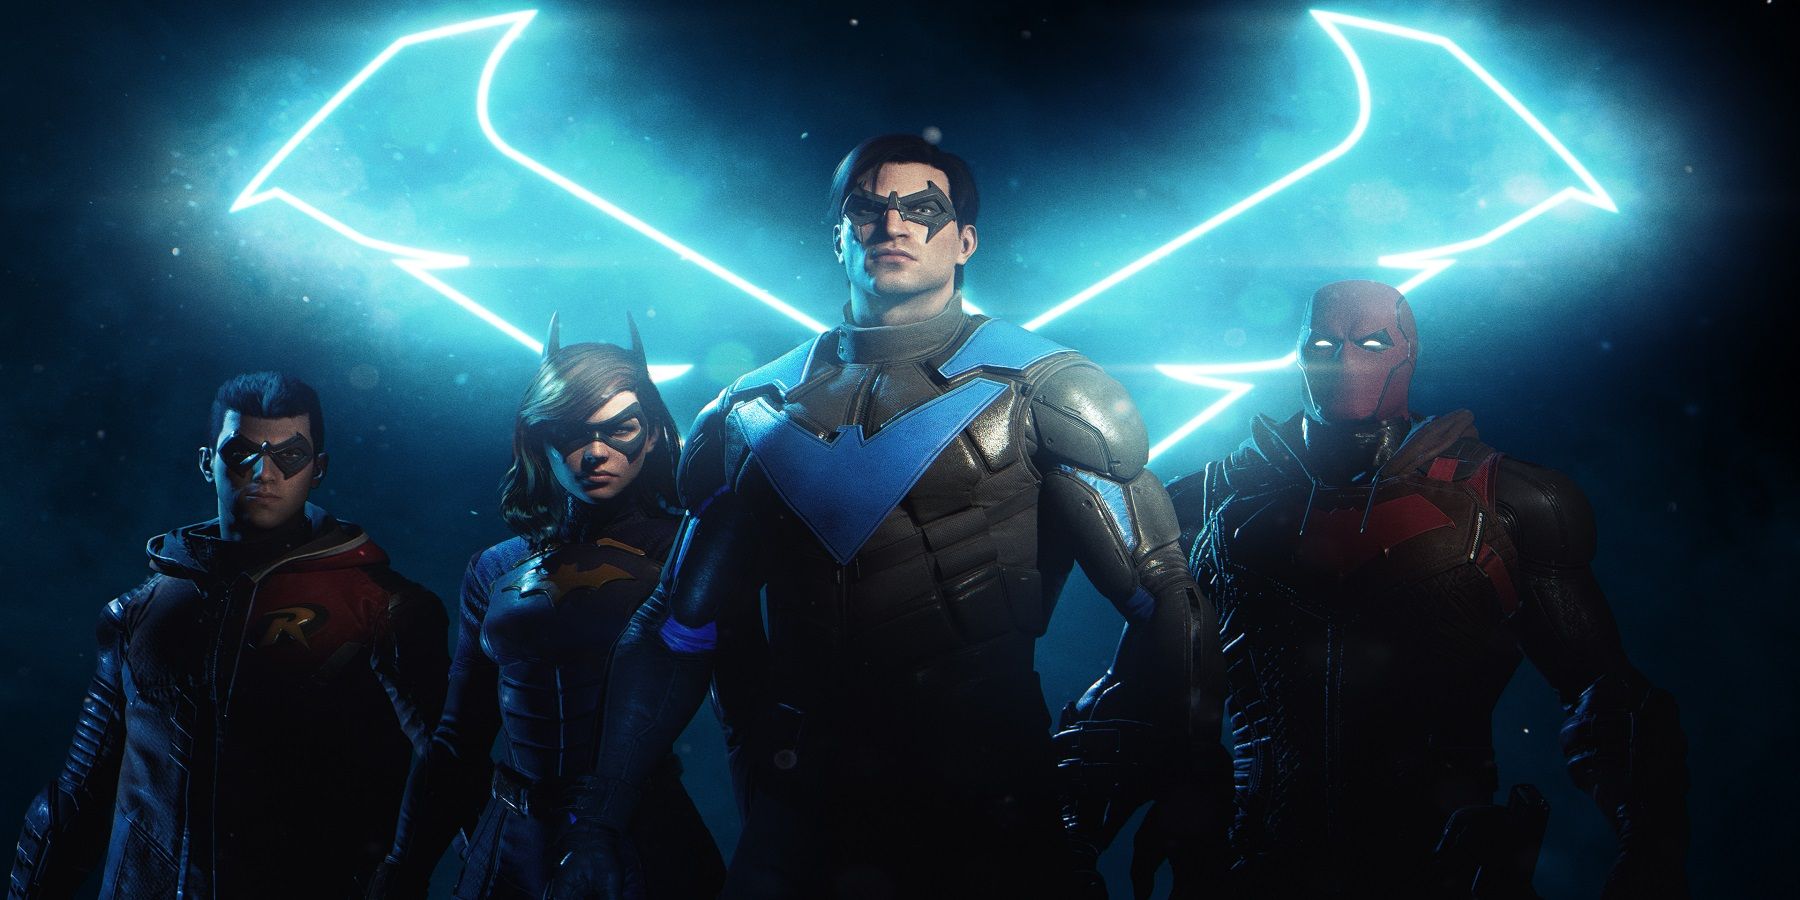 A new Gotham Knights trailer showcases Nightwing and what he brings to Gotham's defense.